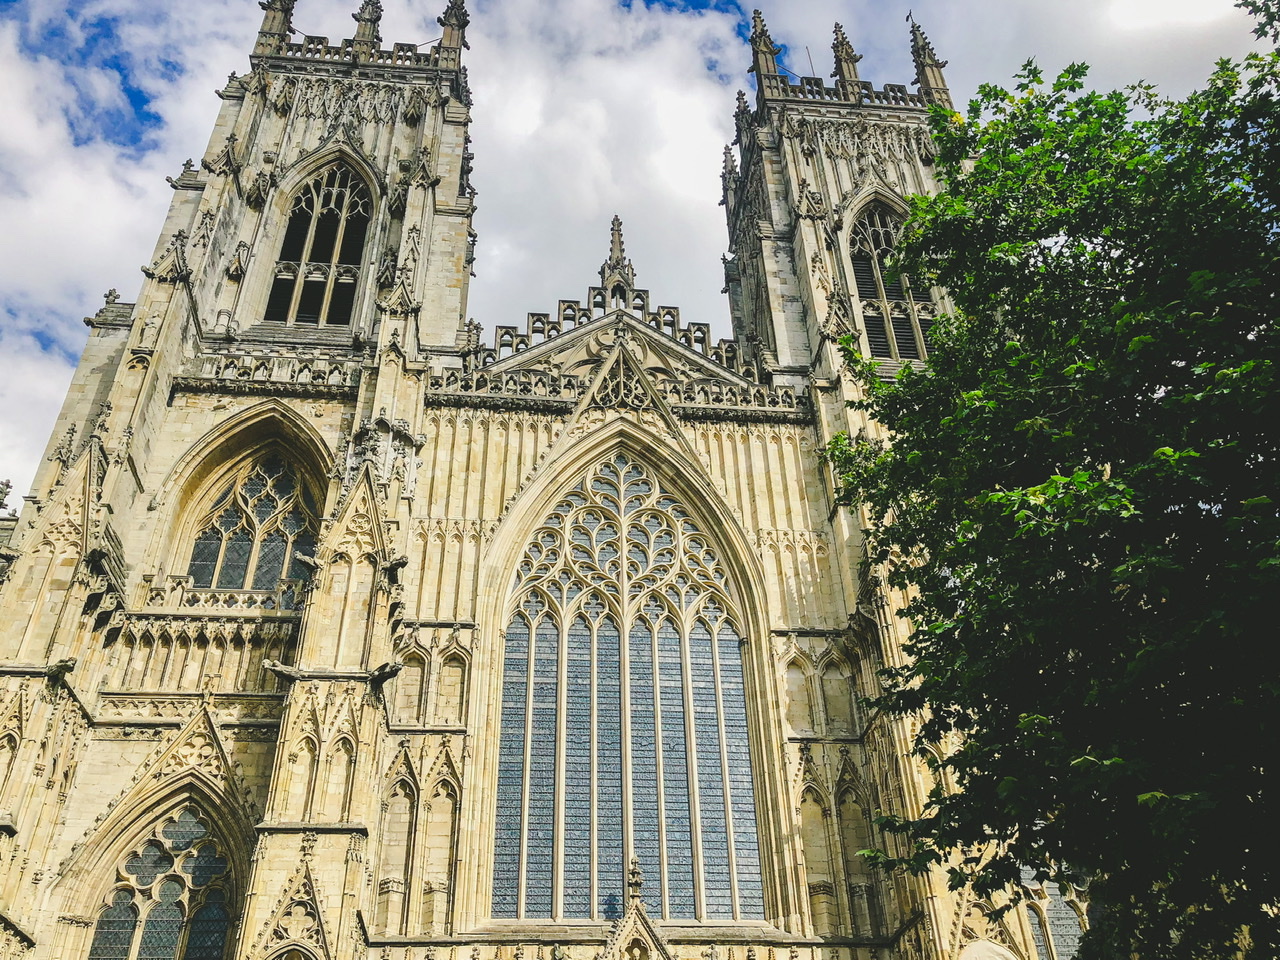 Medieval York Cathedral with two main spires either side of centre building with large glass window